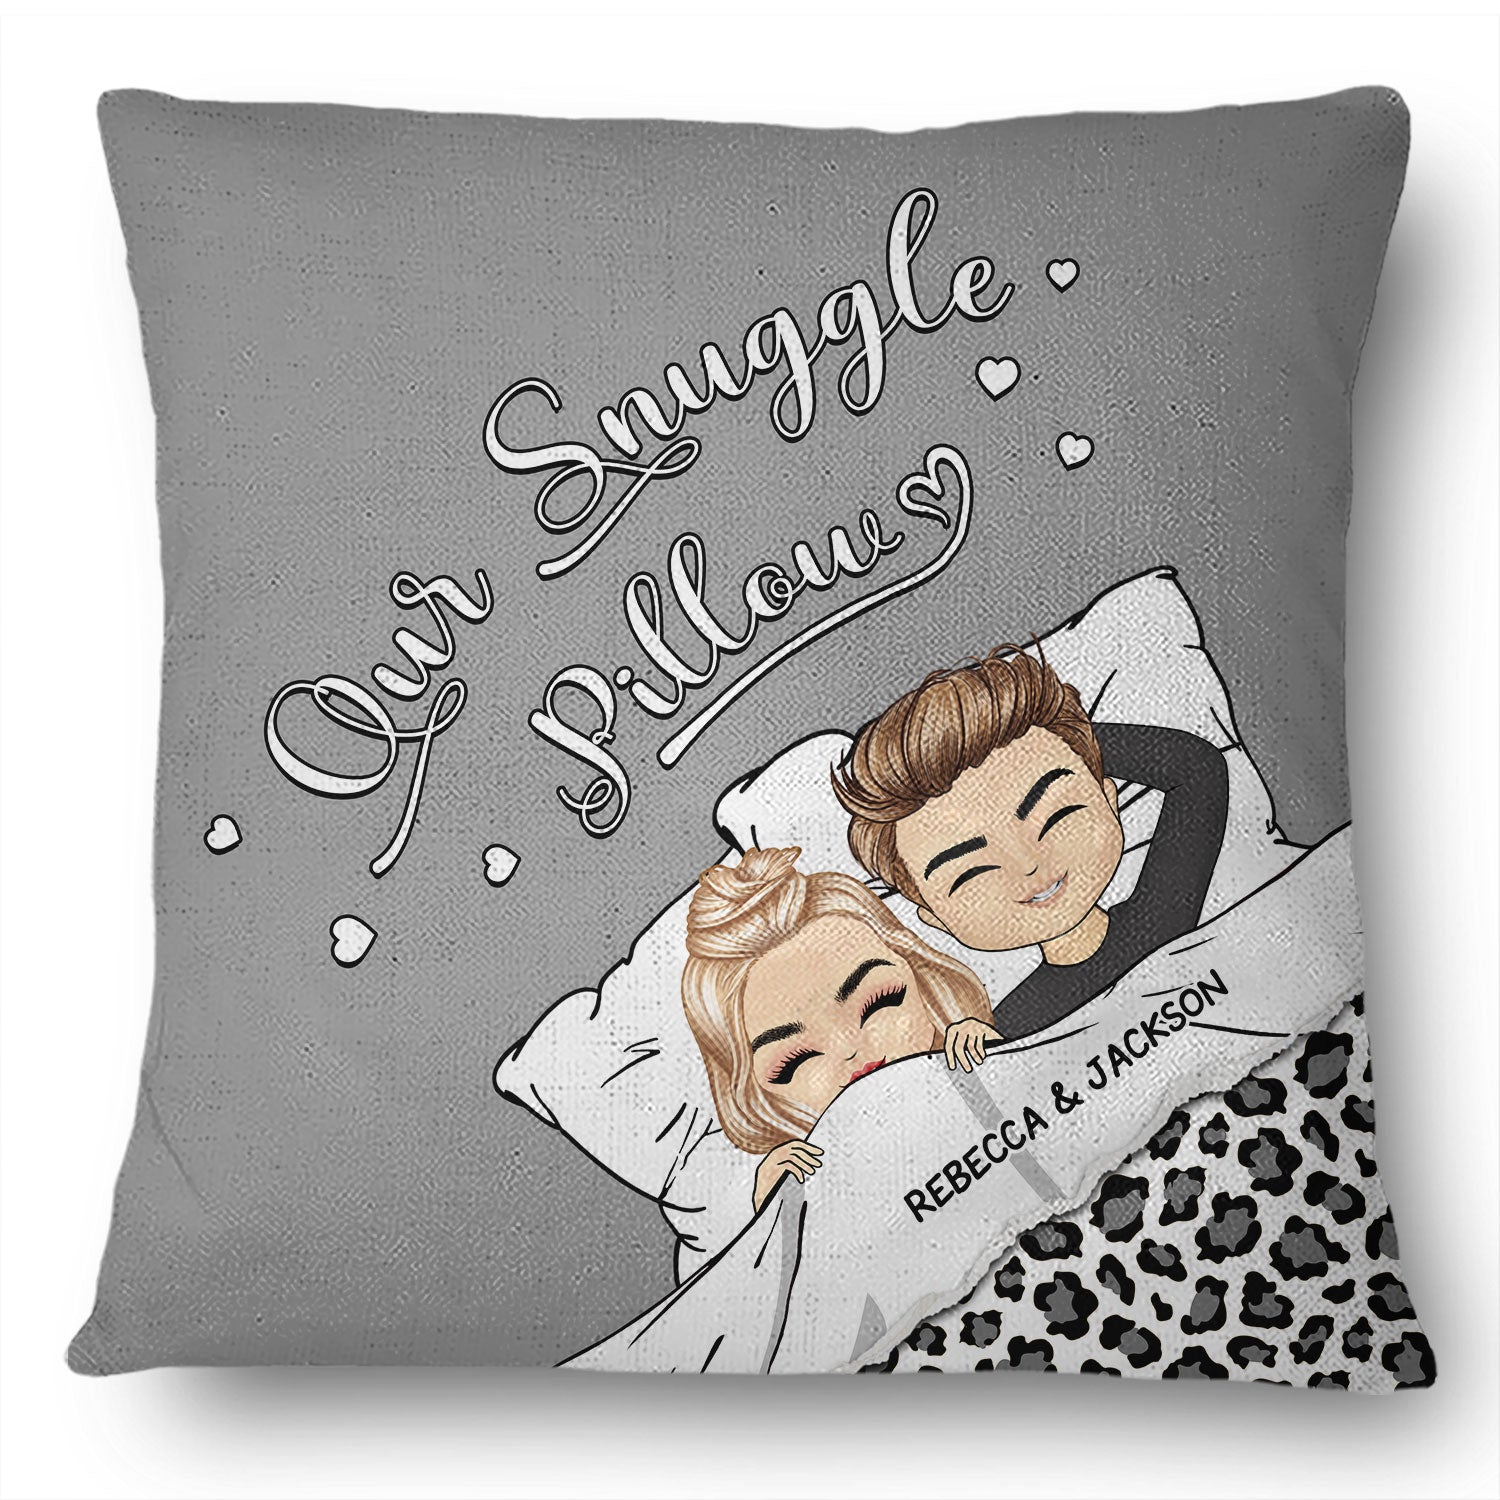 Couple Our Snuggle Pillow - Gift For Couples - Personalized Custom Pillow